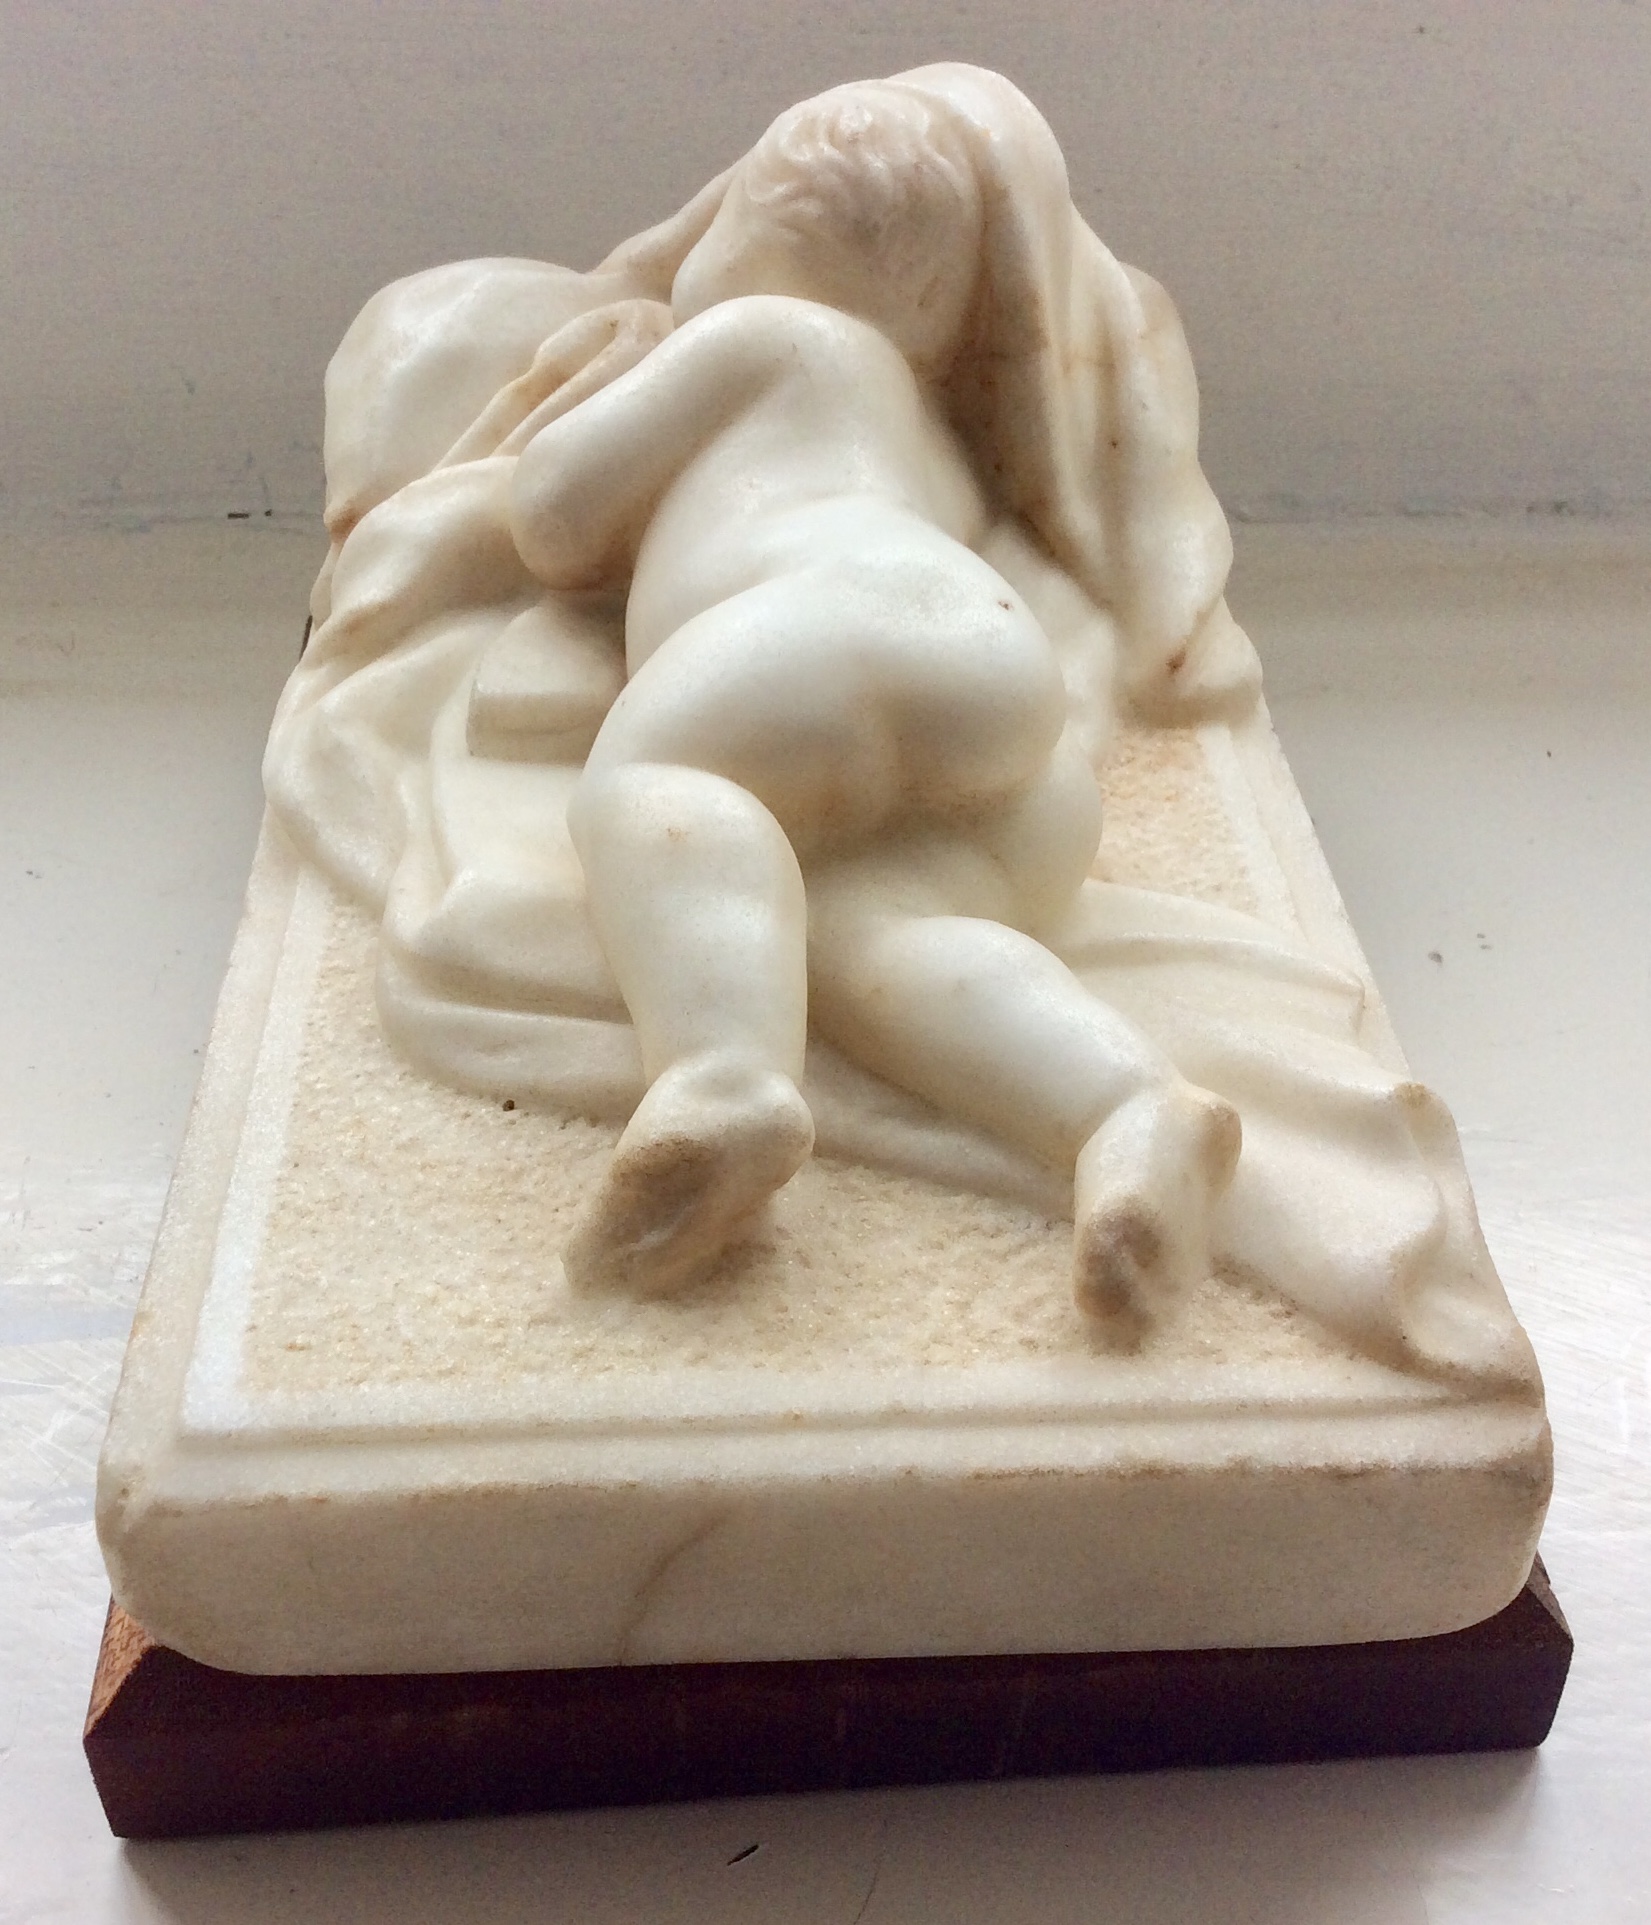 White Marble Sculpture of a Sleeping Child - Image 8 of 10